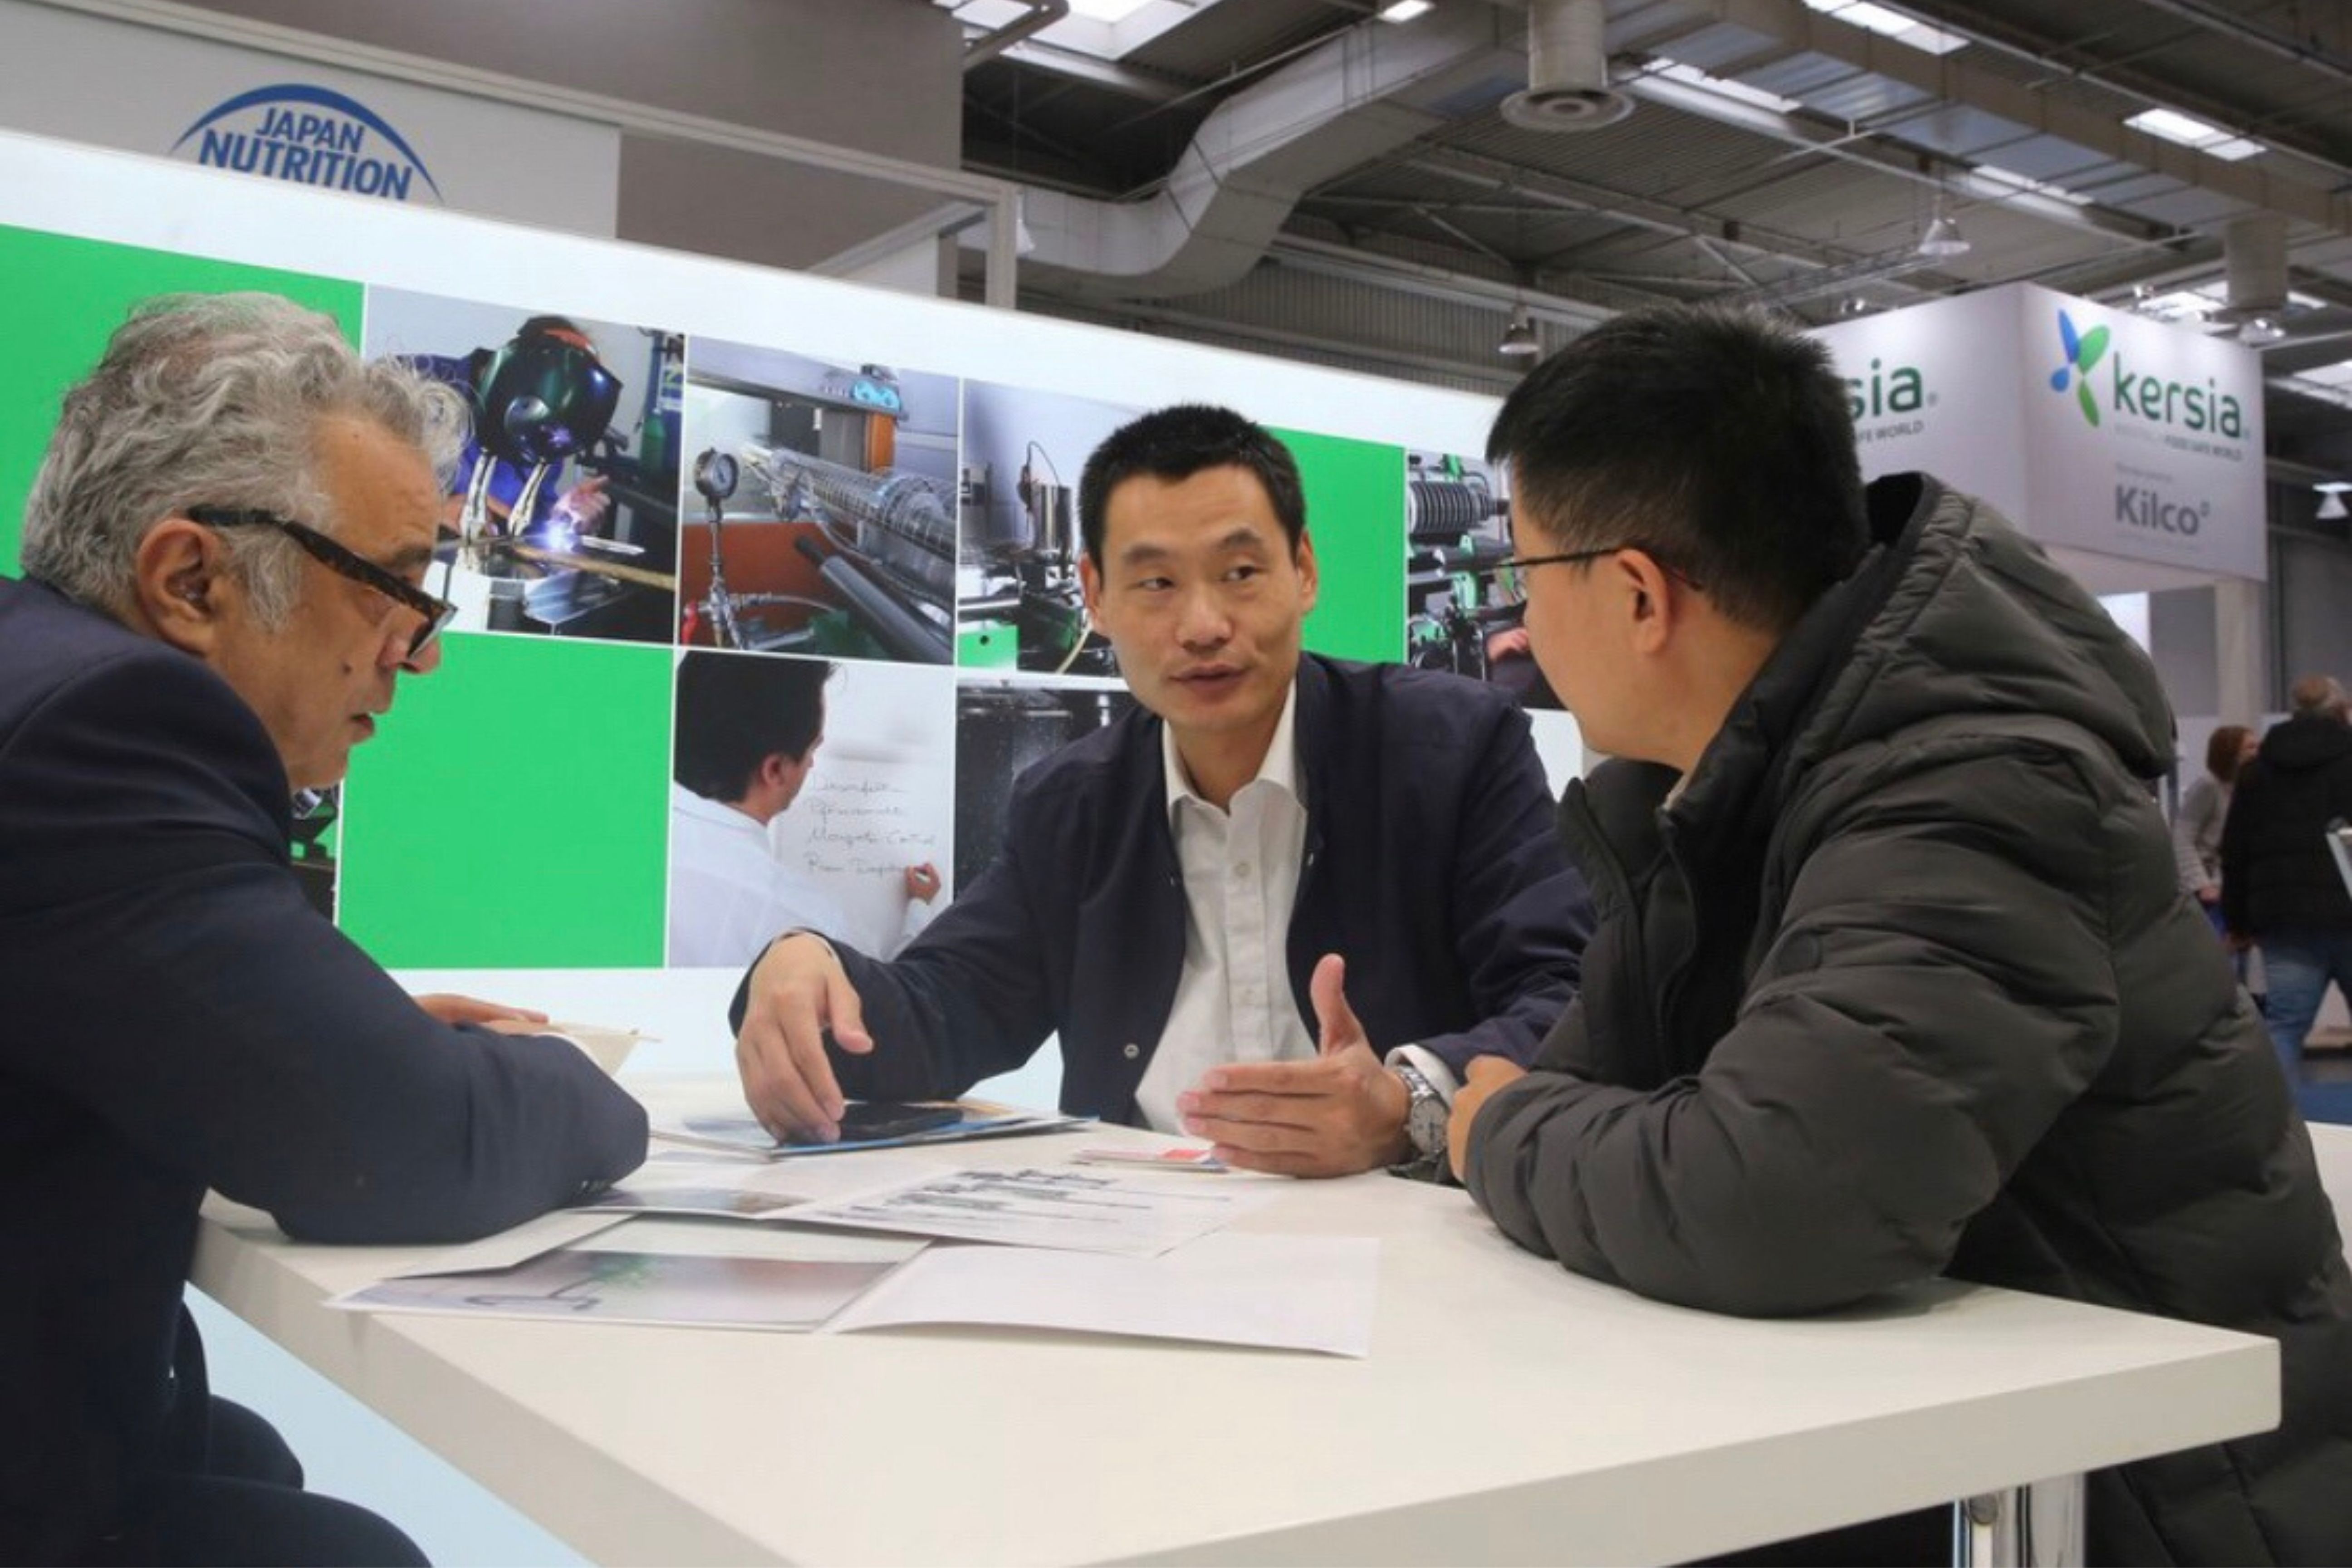 EuroTier China invites cattle farmers to join a road show